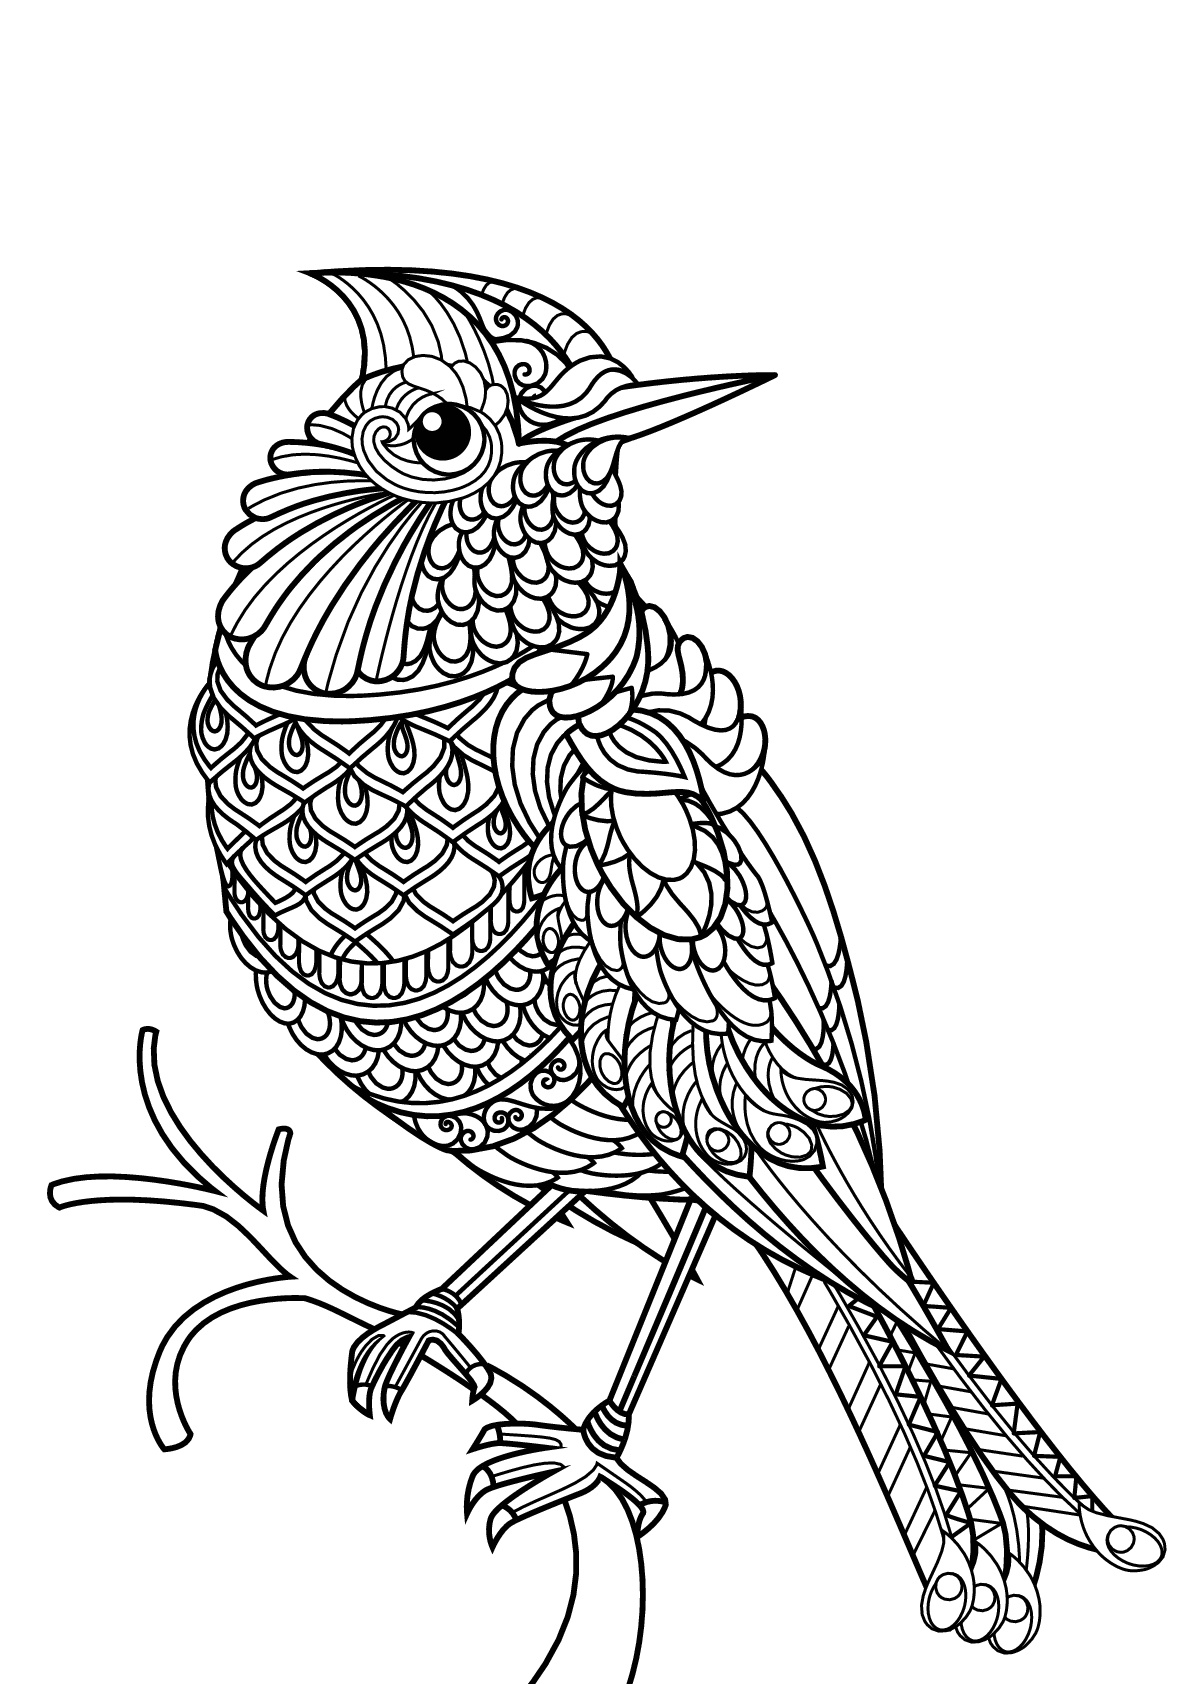 Free book bird - Birds Adult Coloring Pages